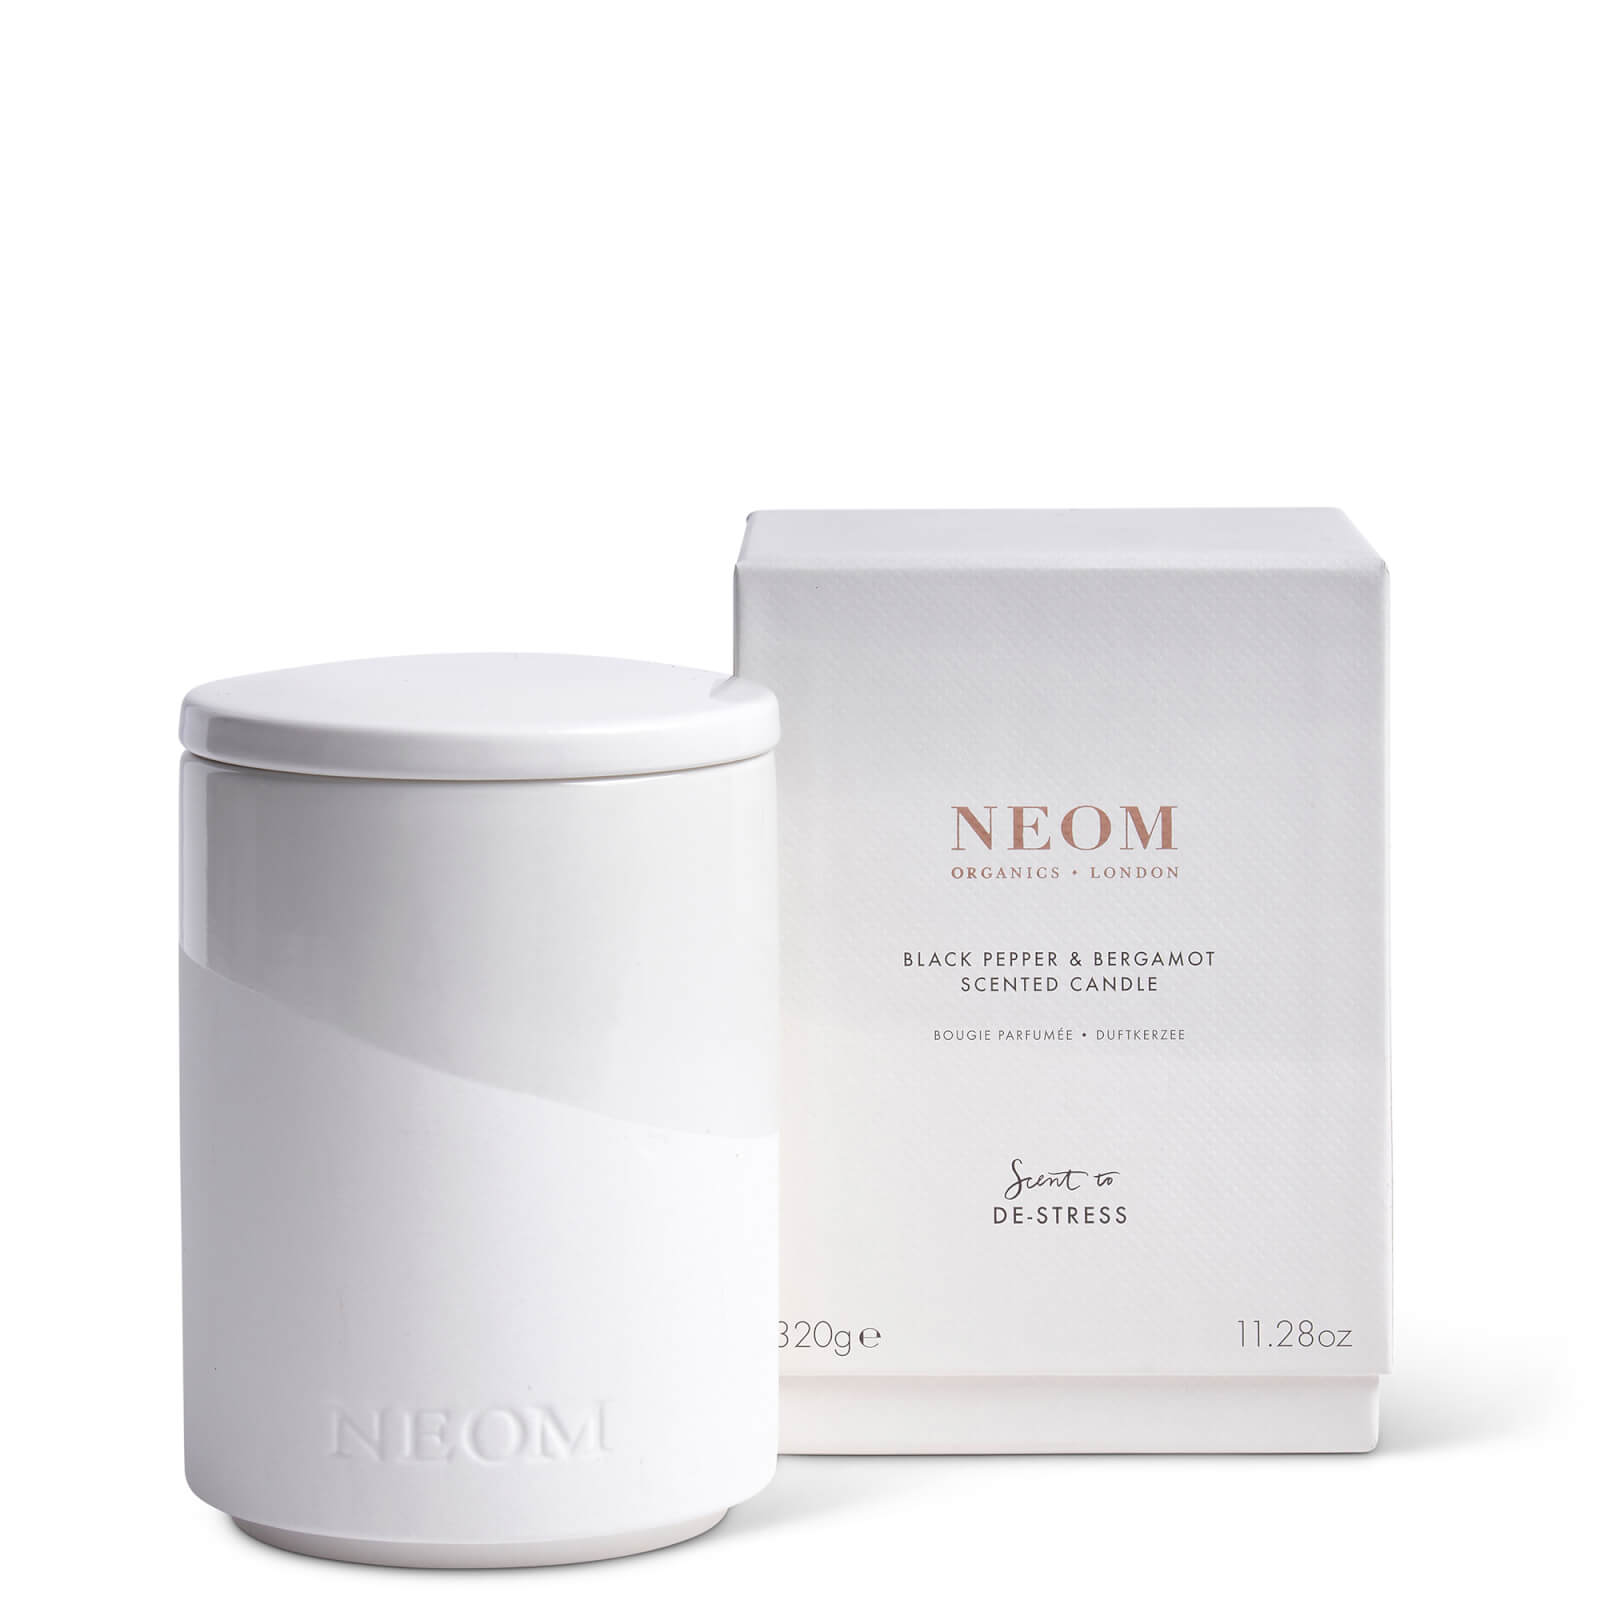 Image of NEOM Black Pepper and Bergamot Scented Candle 320g